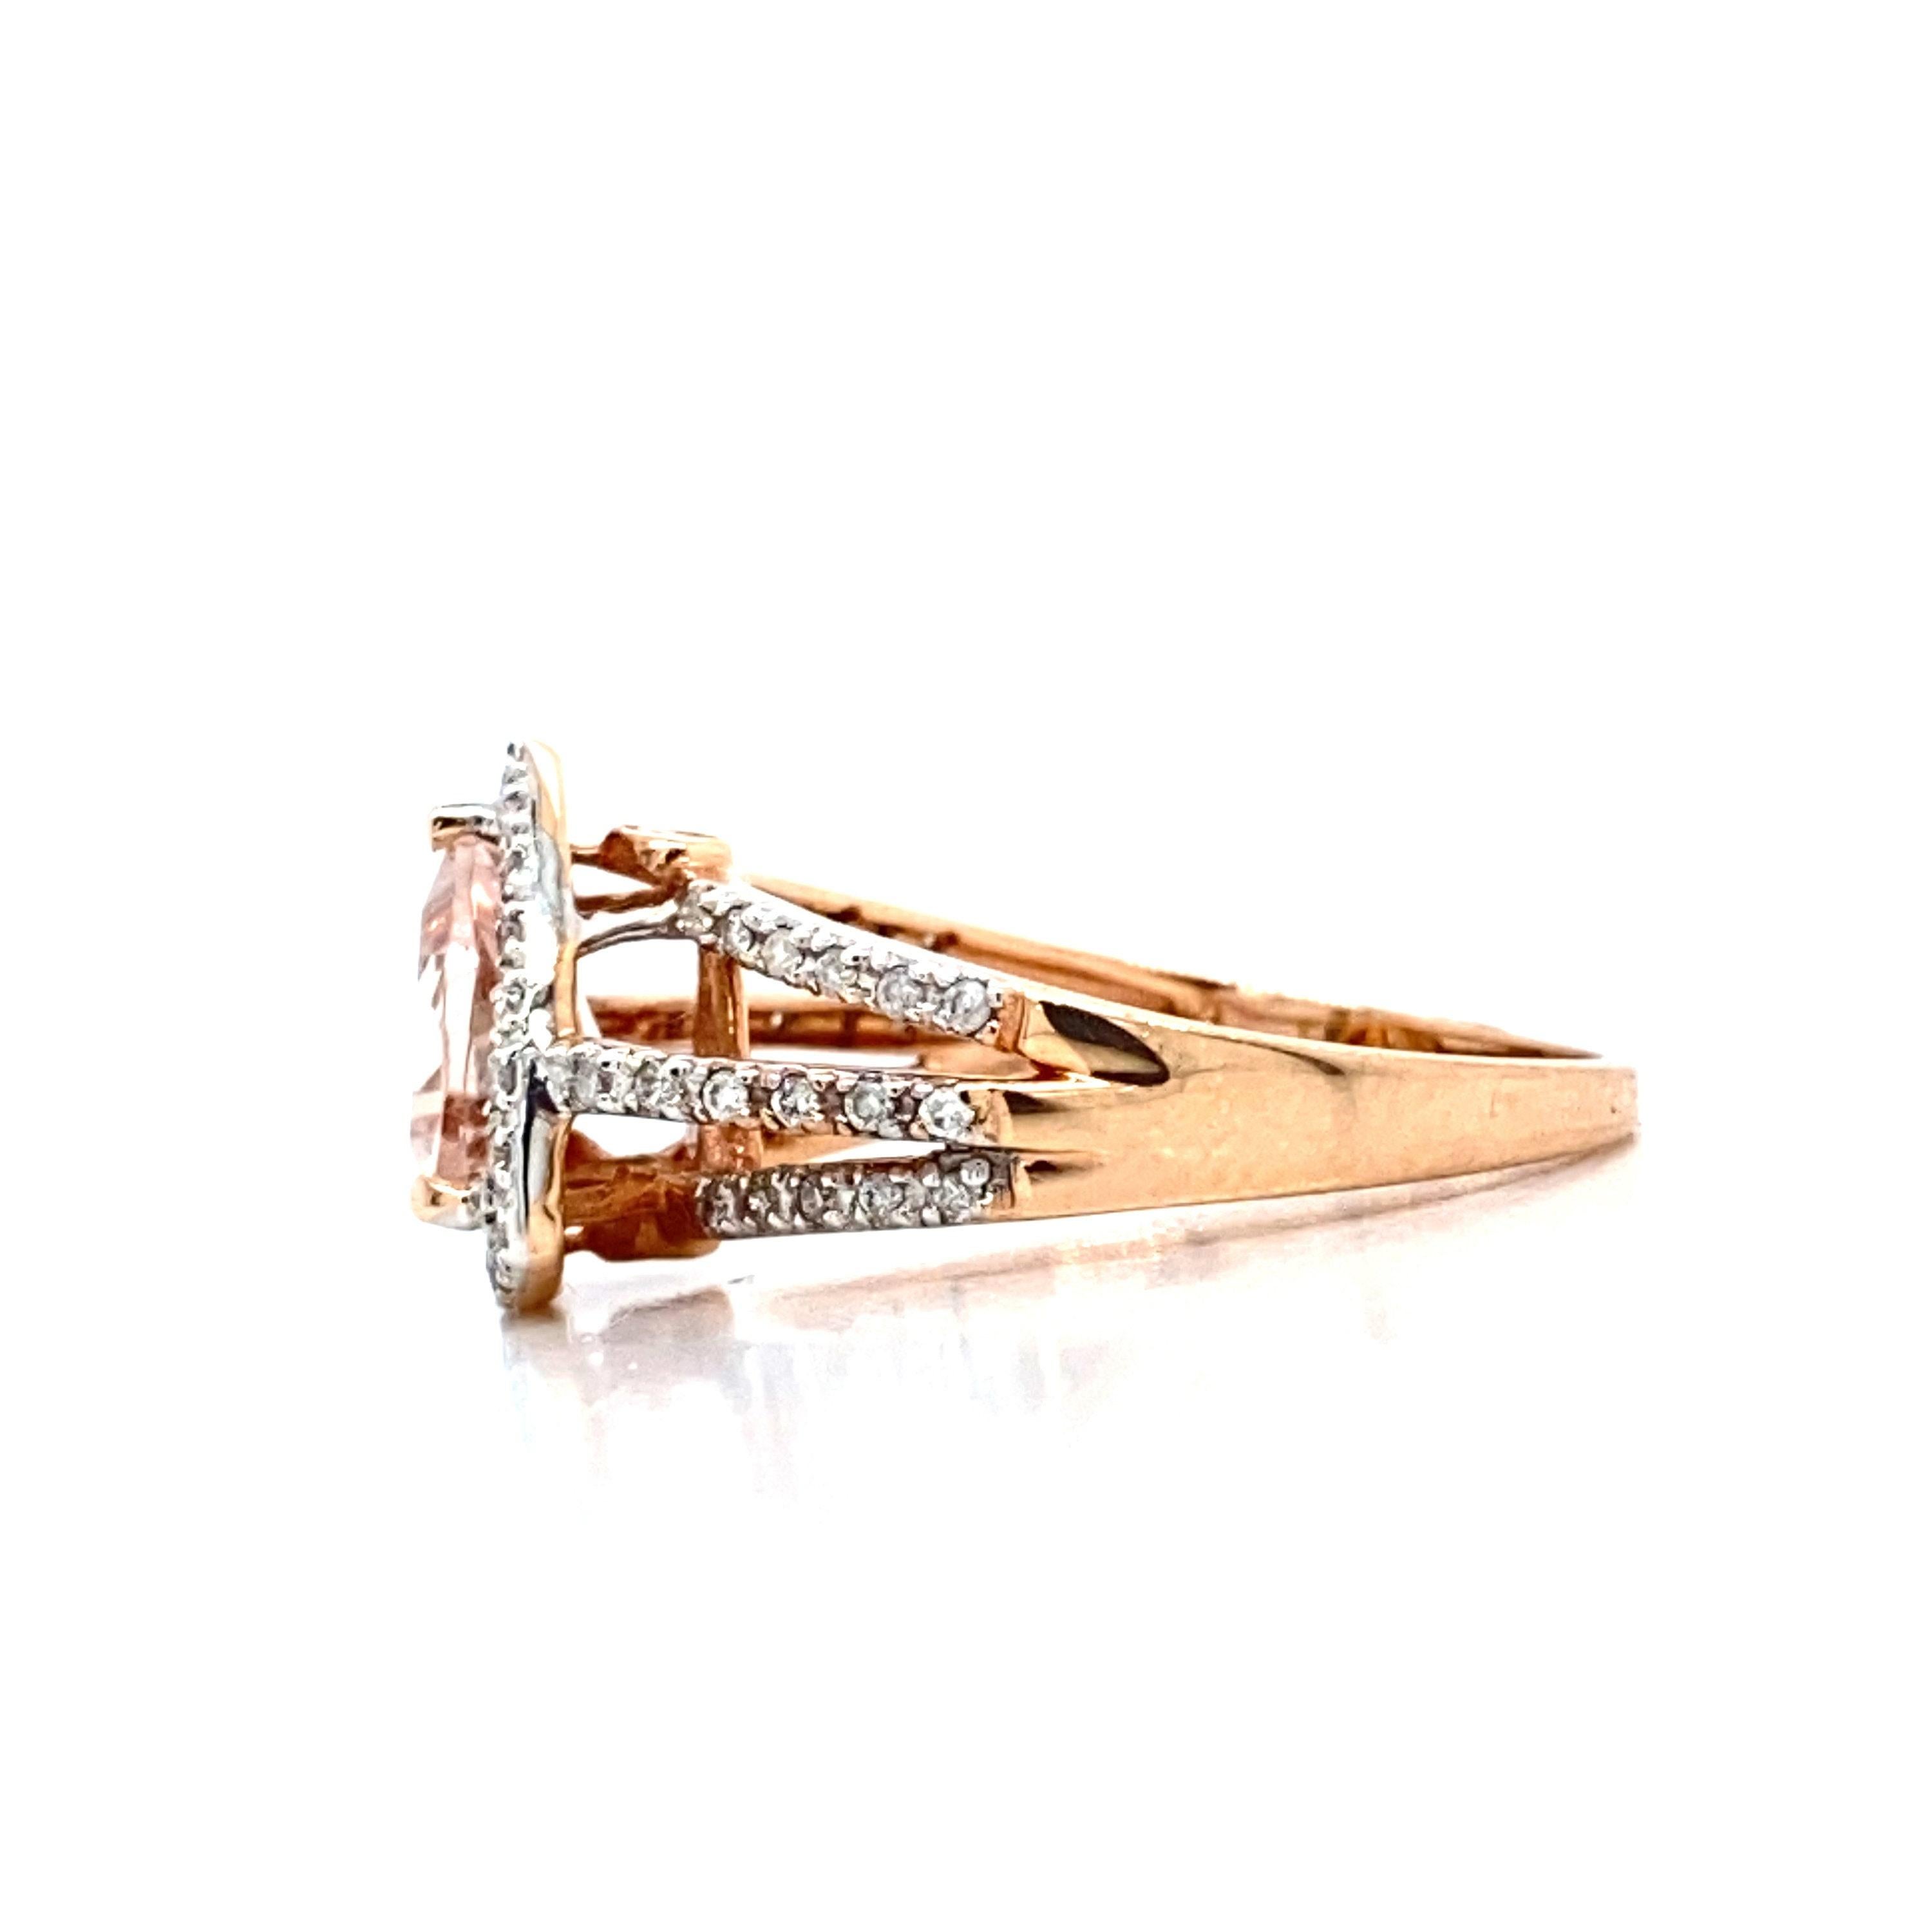 This is a gorgeous natural 1.38CT morganite and diamond halo vintage ring set in solid 14K rose gold. The natural 8MM trillion cut morganite has an excellent peachy pink color (AAA quality gem) and is surrounded by a halo of round cut white